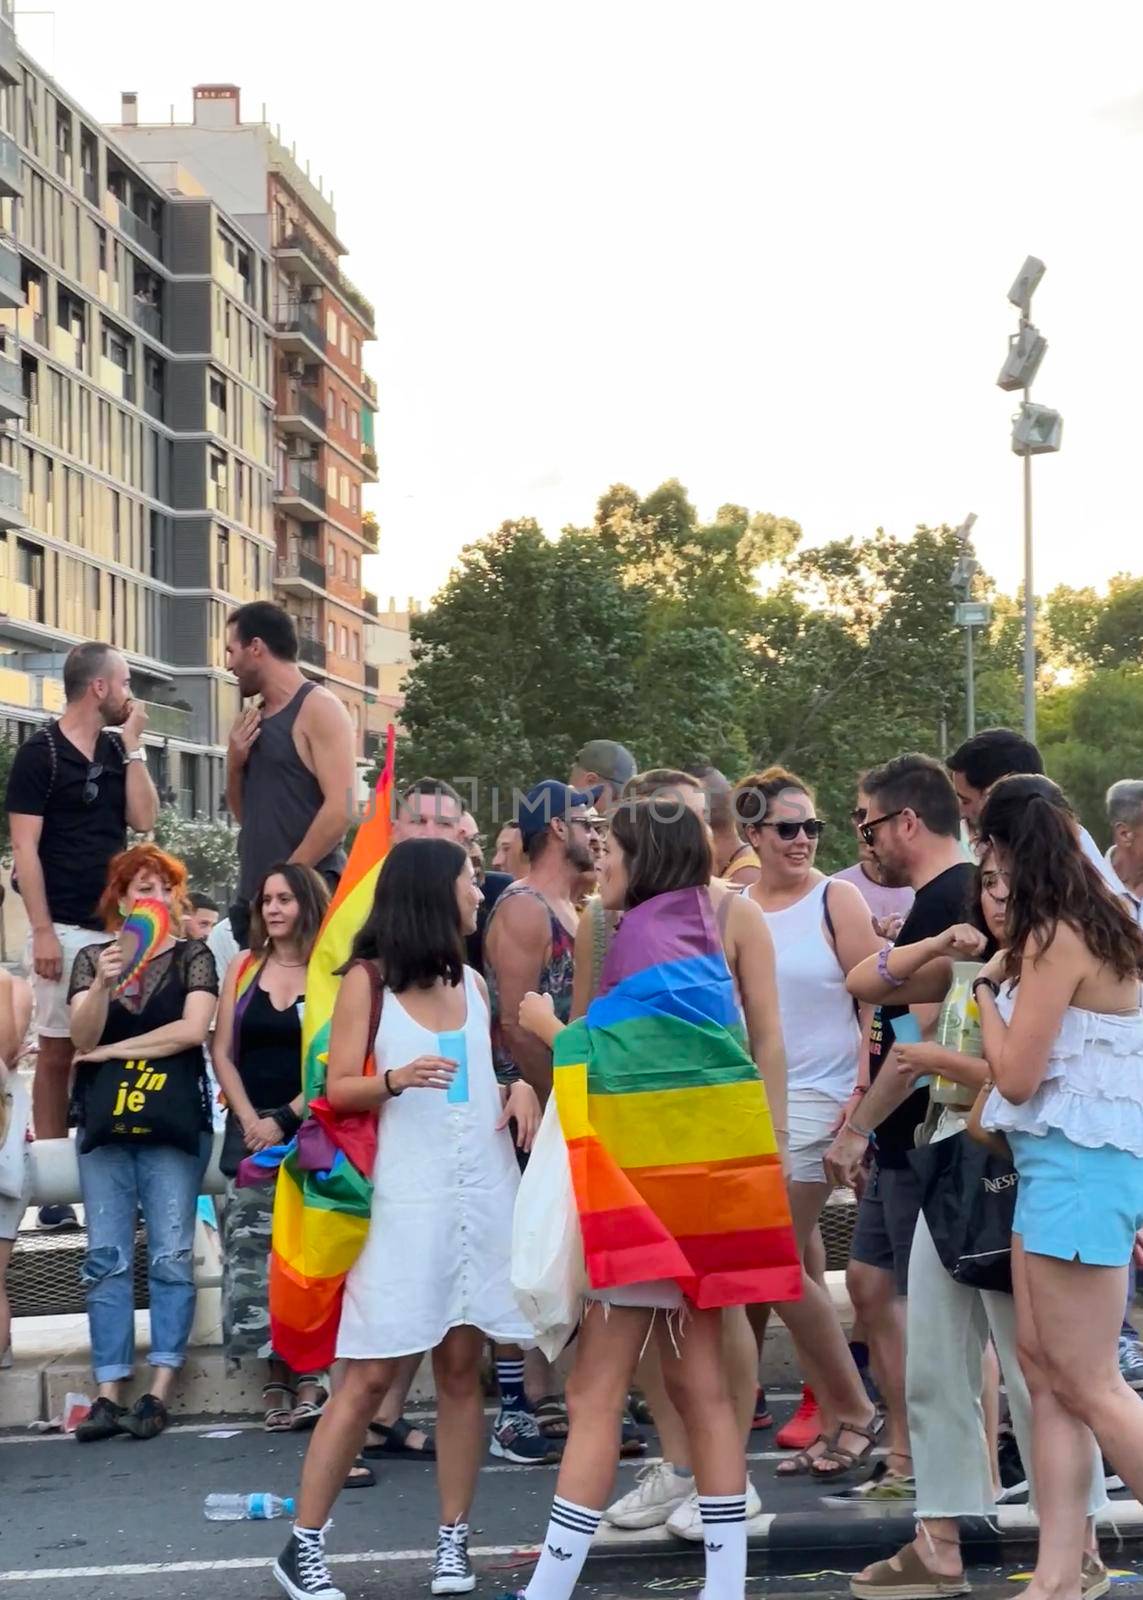 Valencia, Spain 25 June 2022: Manifest of a attractive participants of the World Pride festival in Valencia 2022. Parade of a International People celebrates the LGBT Gay Pride by Jyliana